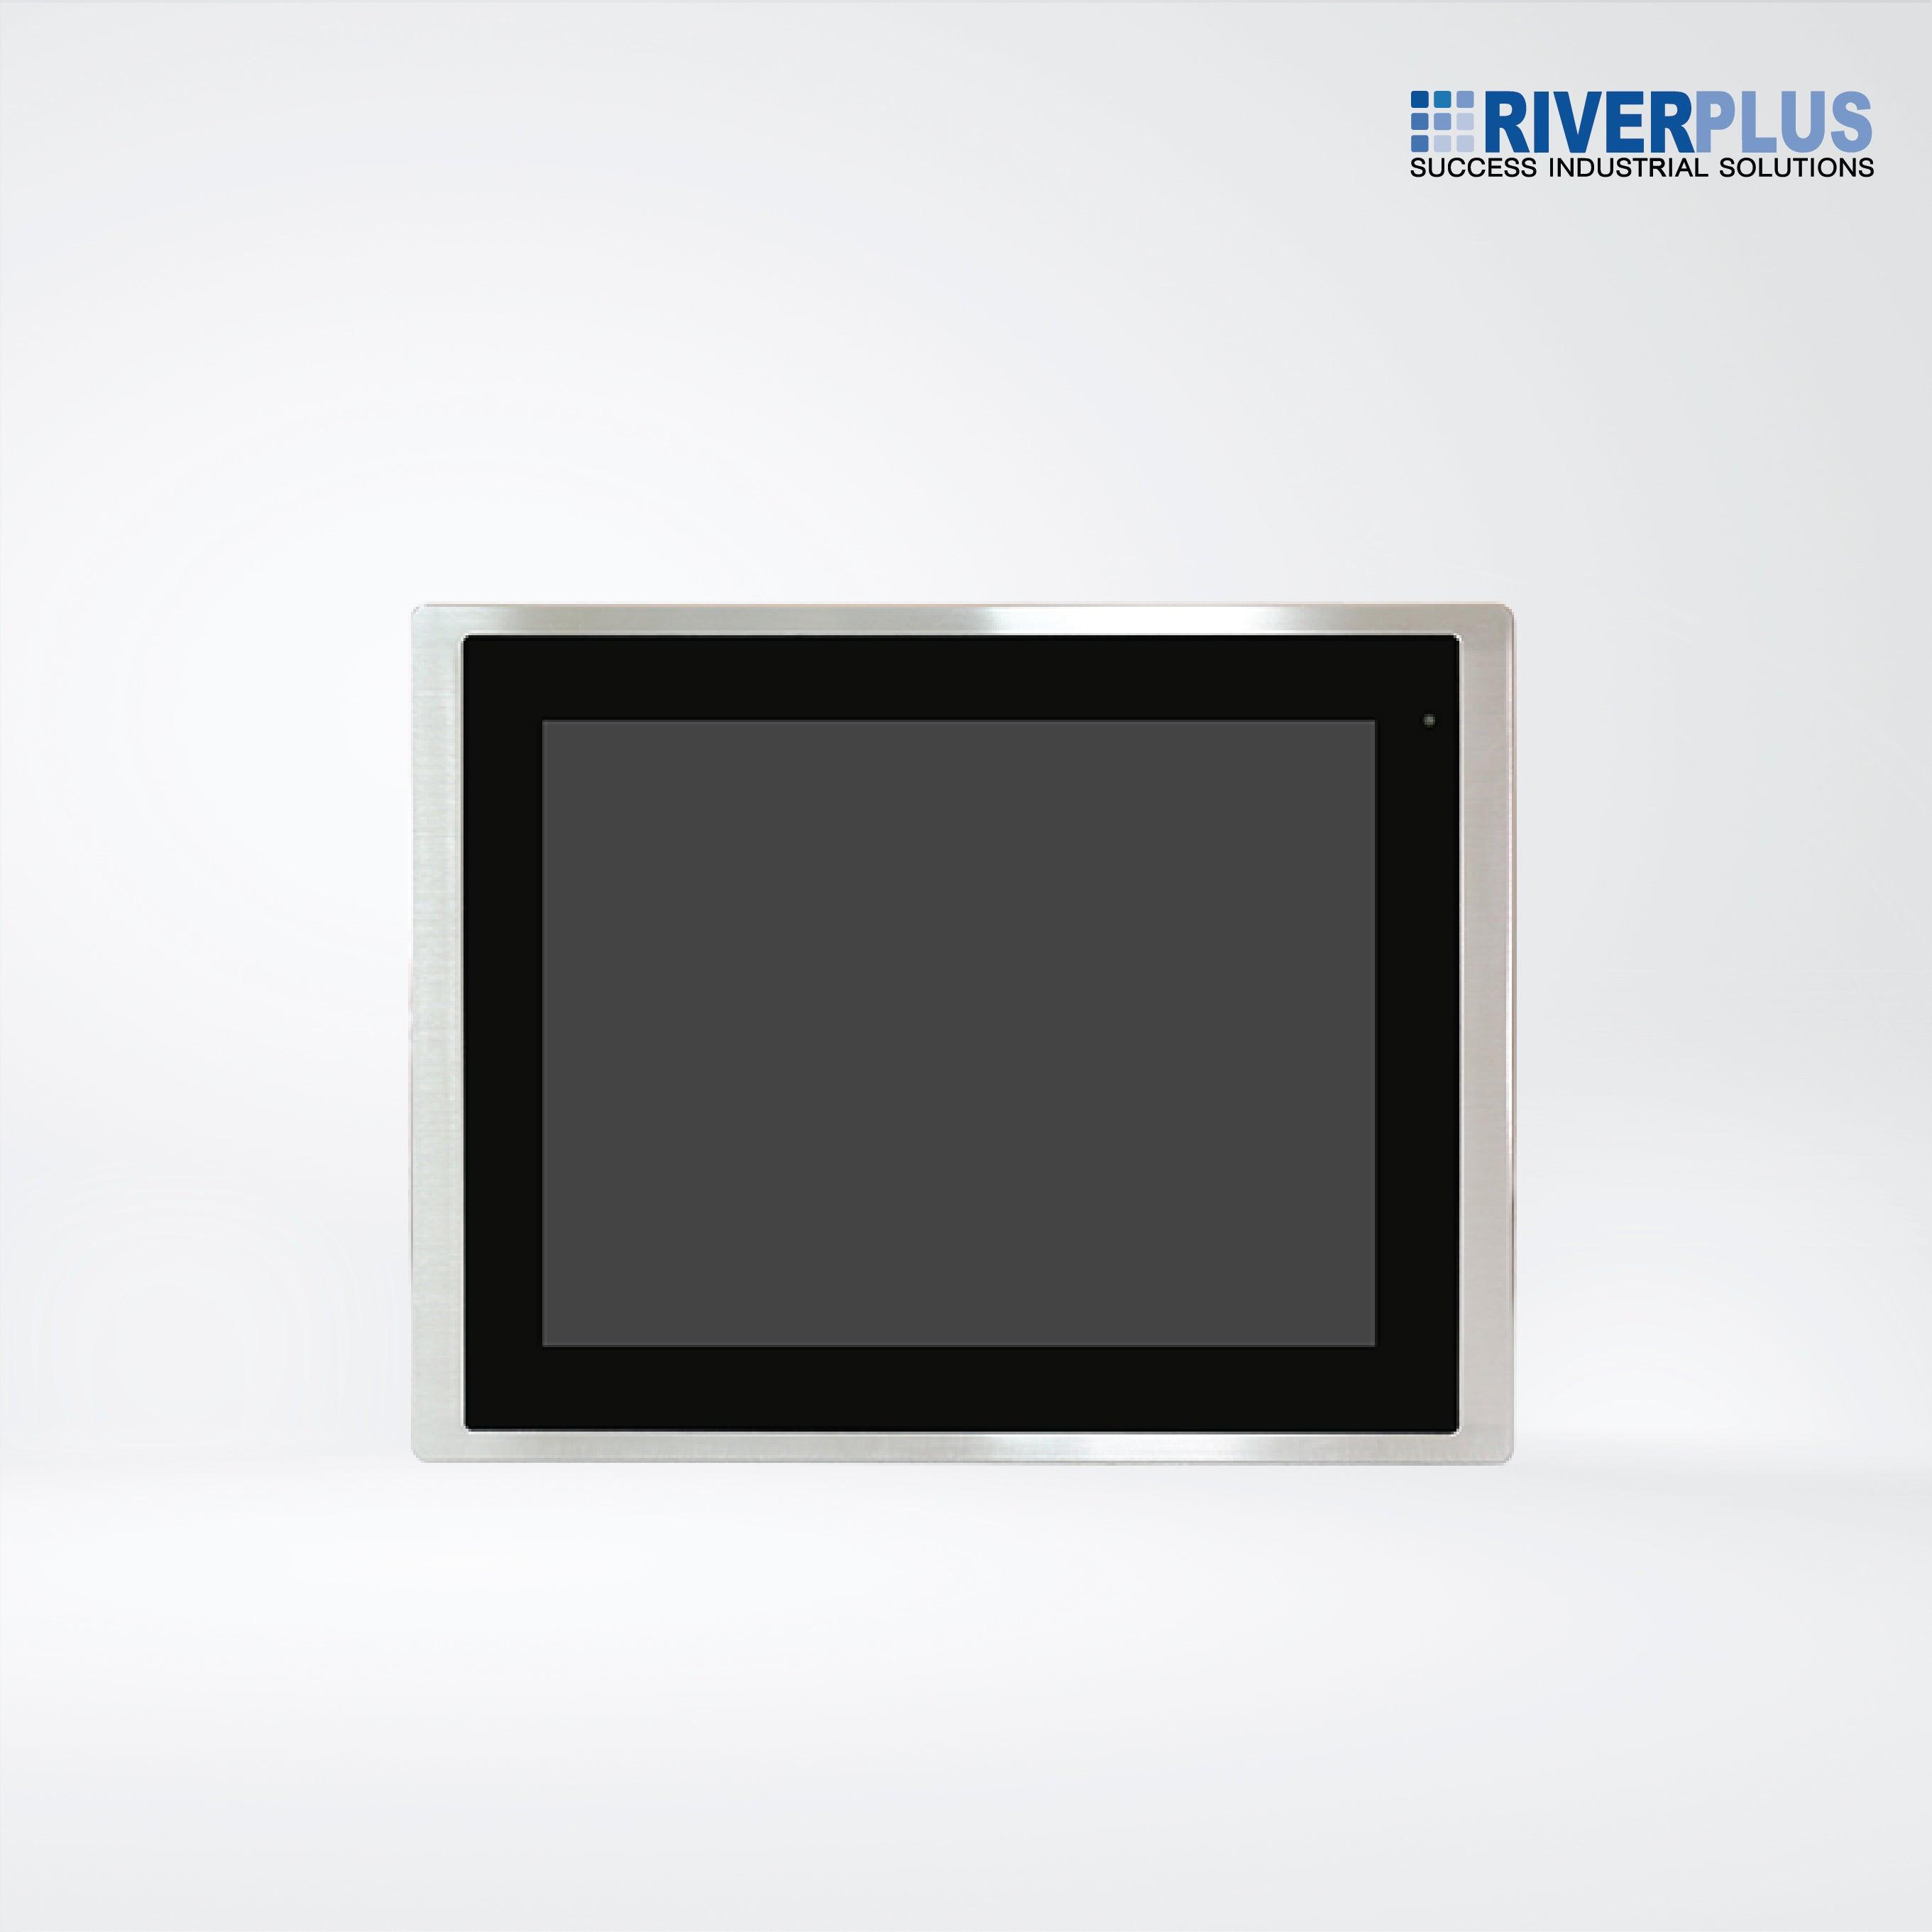 FABS-112R 12.1” Flat Front Panel IP66 Stainless Chassis Display - Riverplus